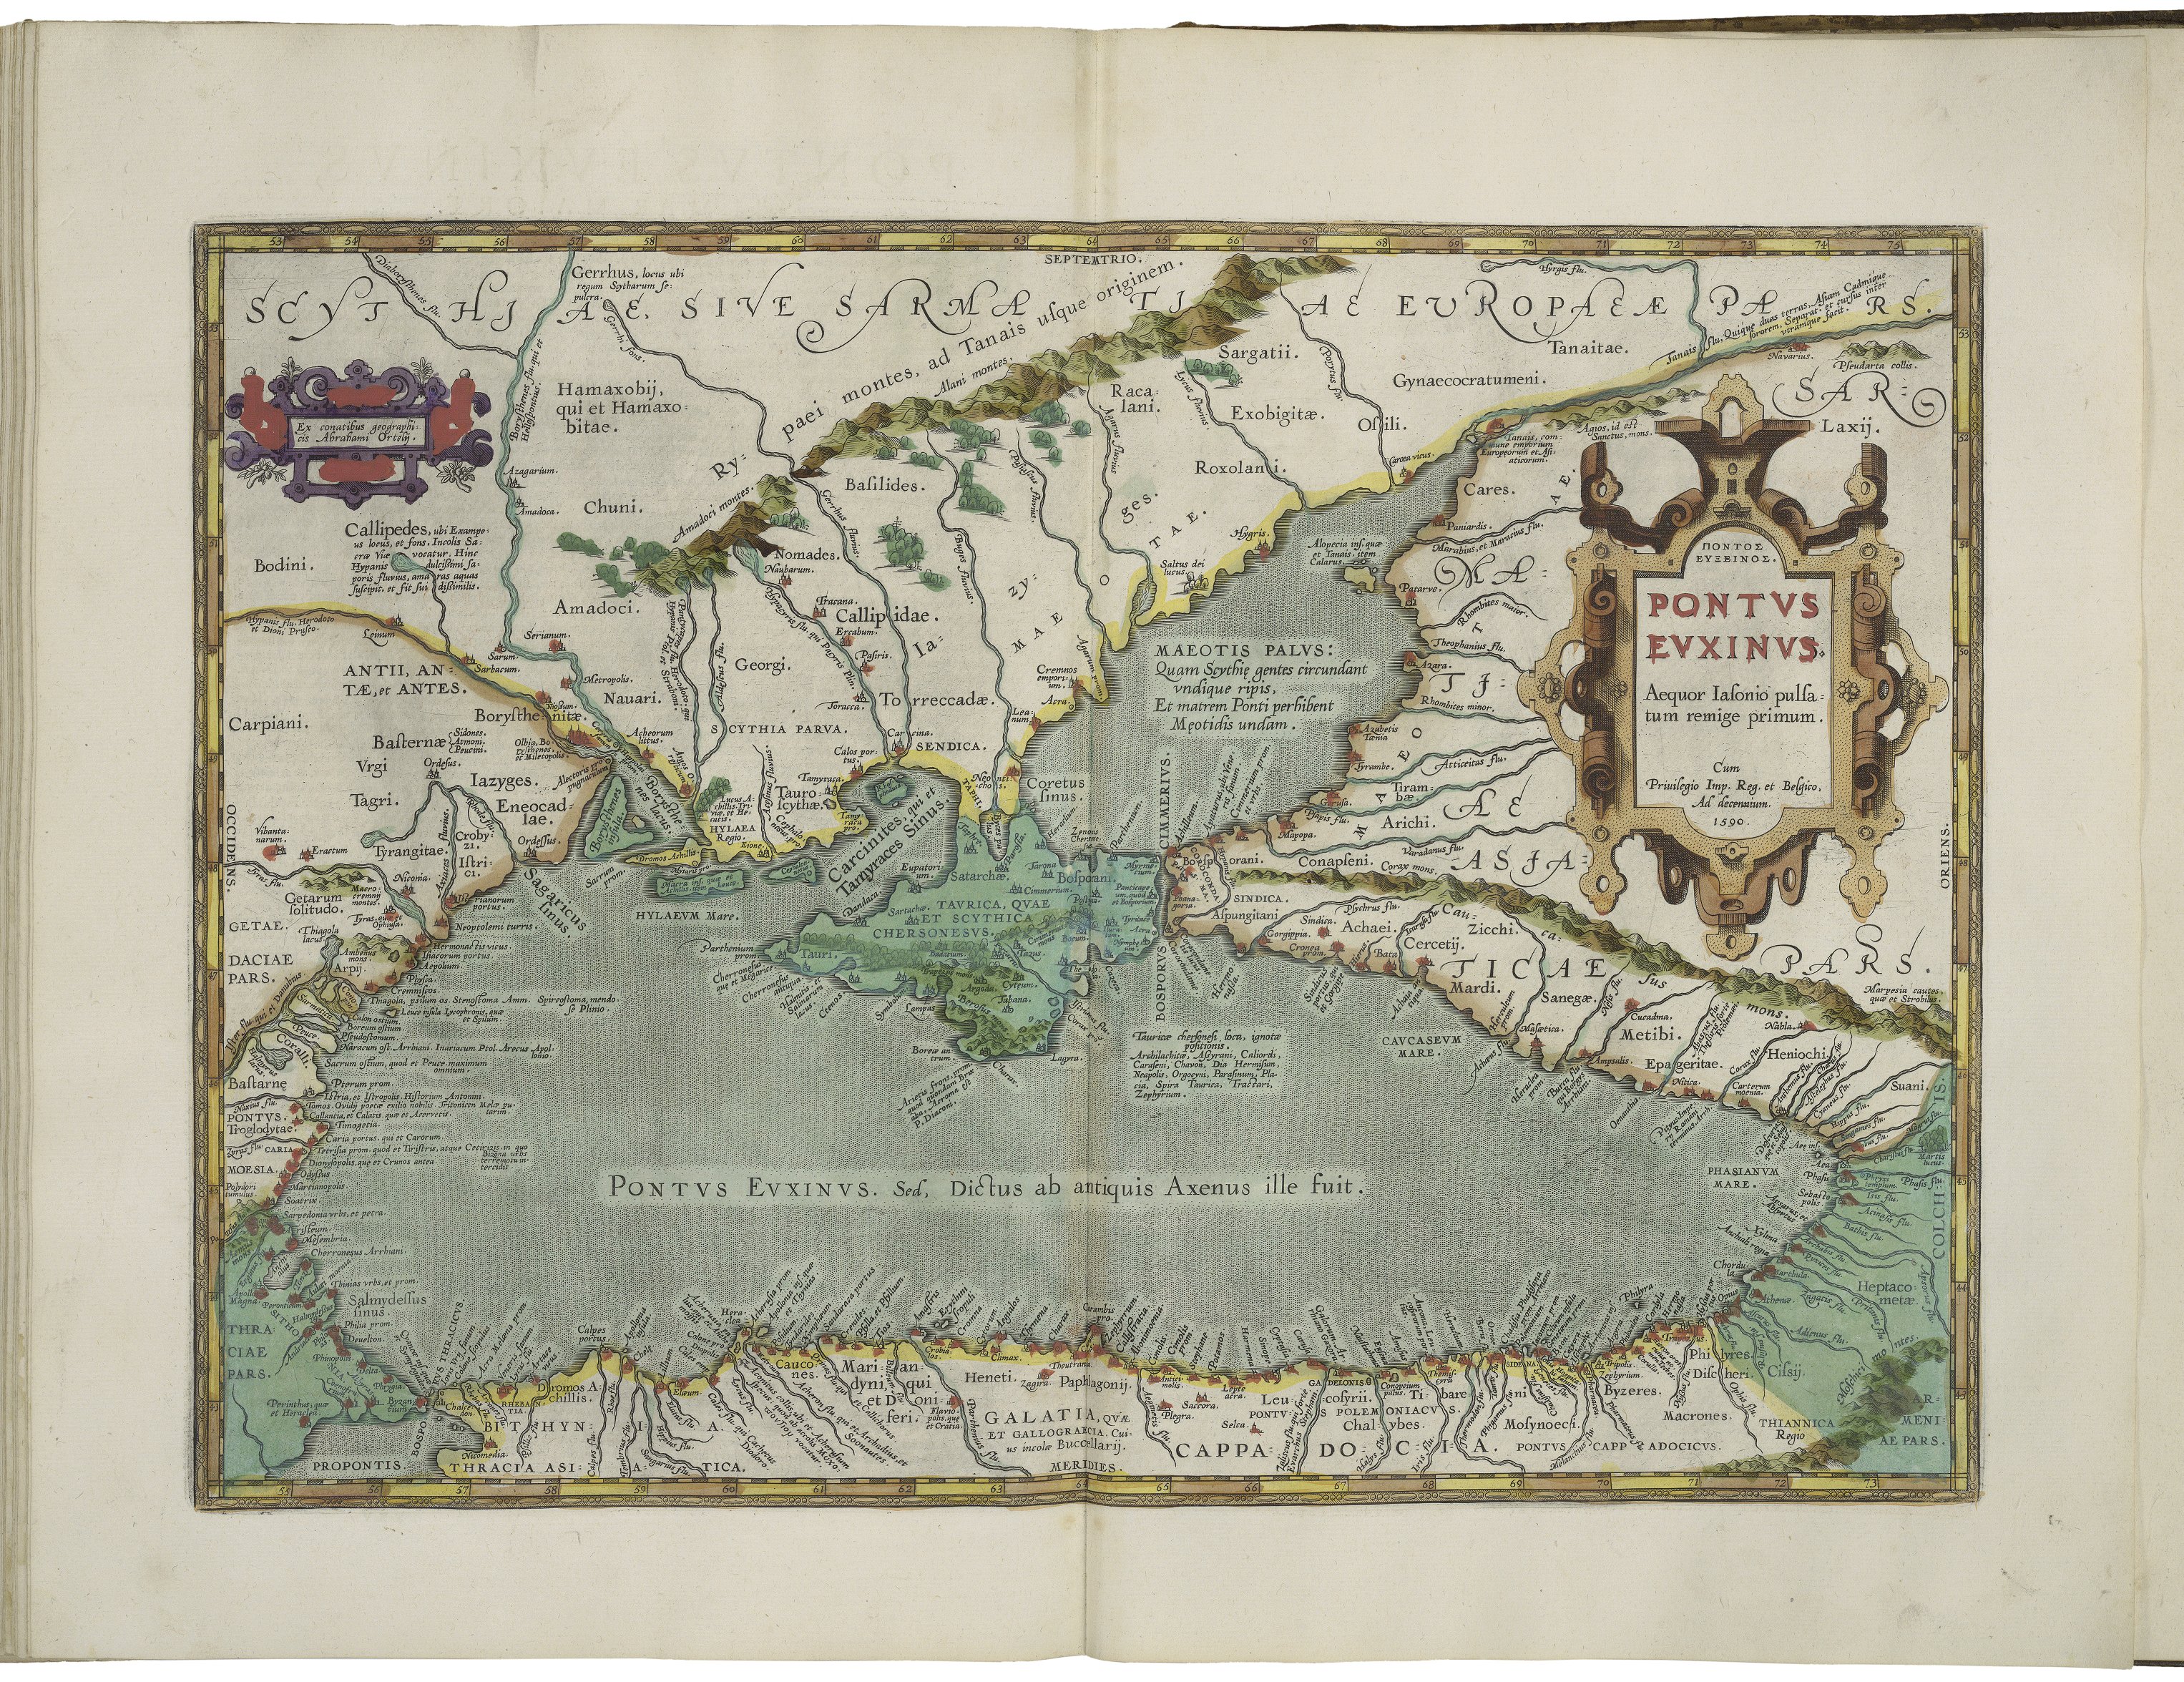 Map of the Black Sea by Abraham Ortelius